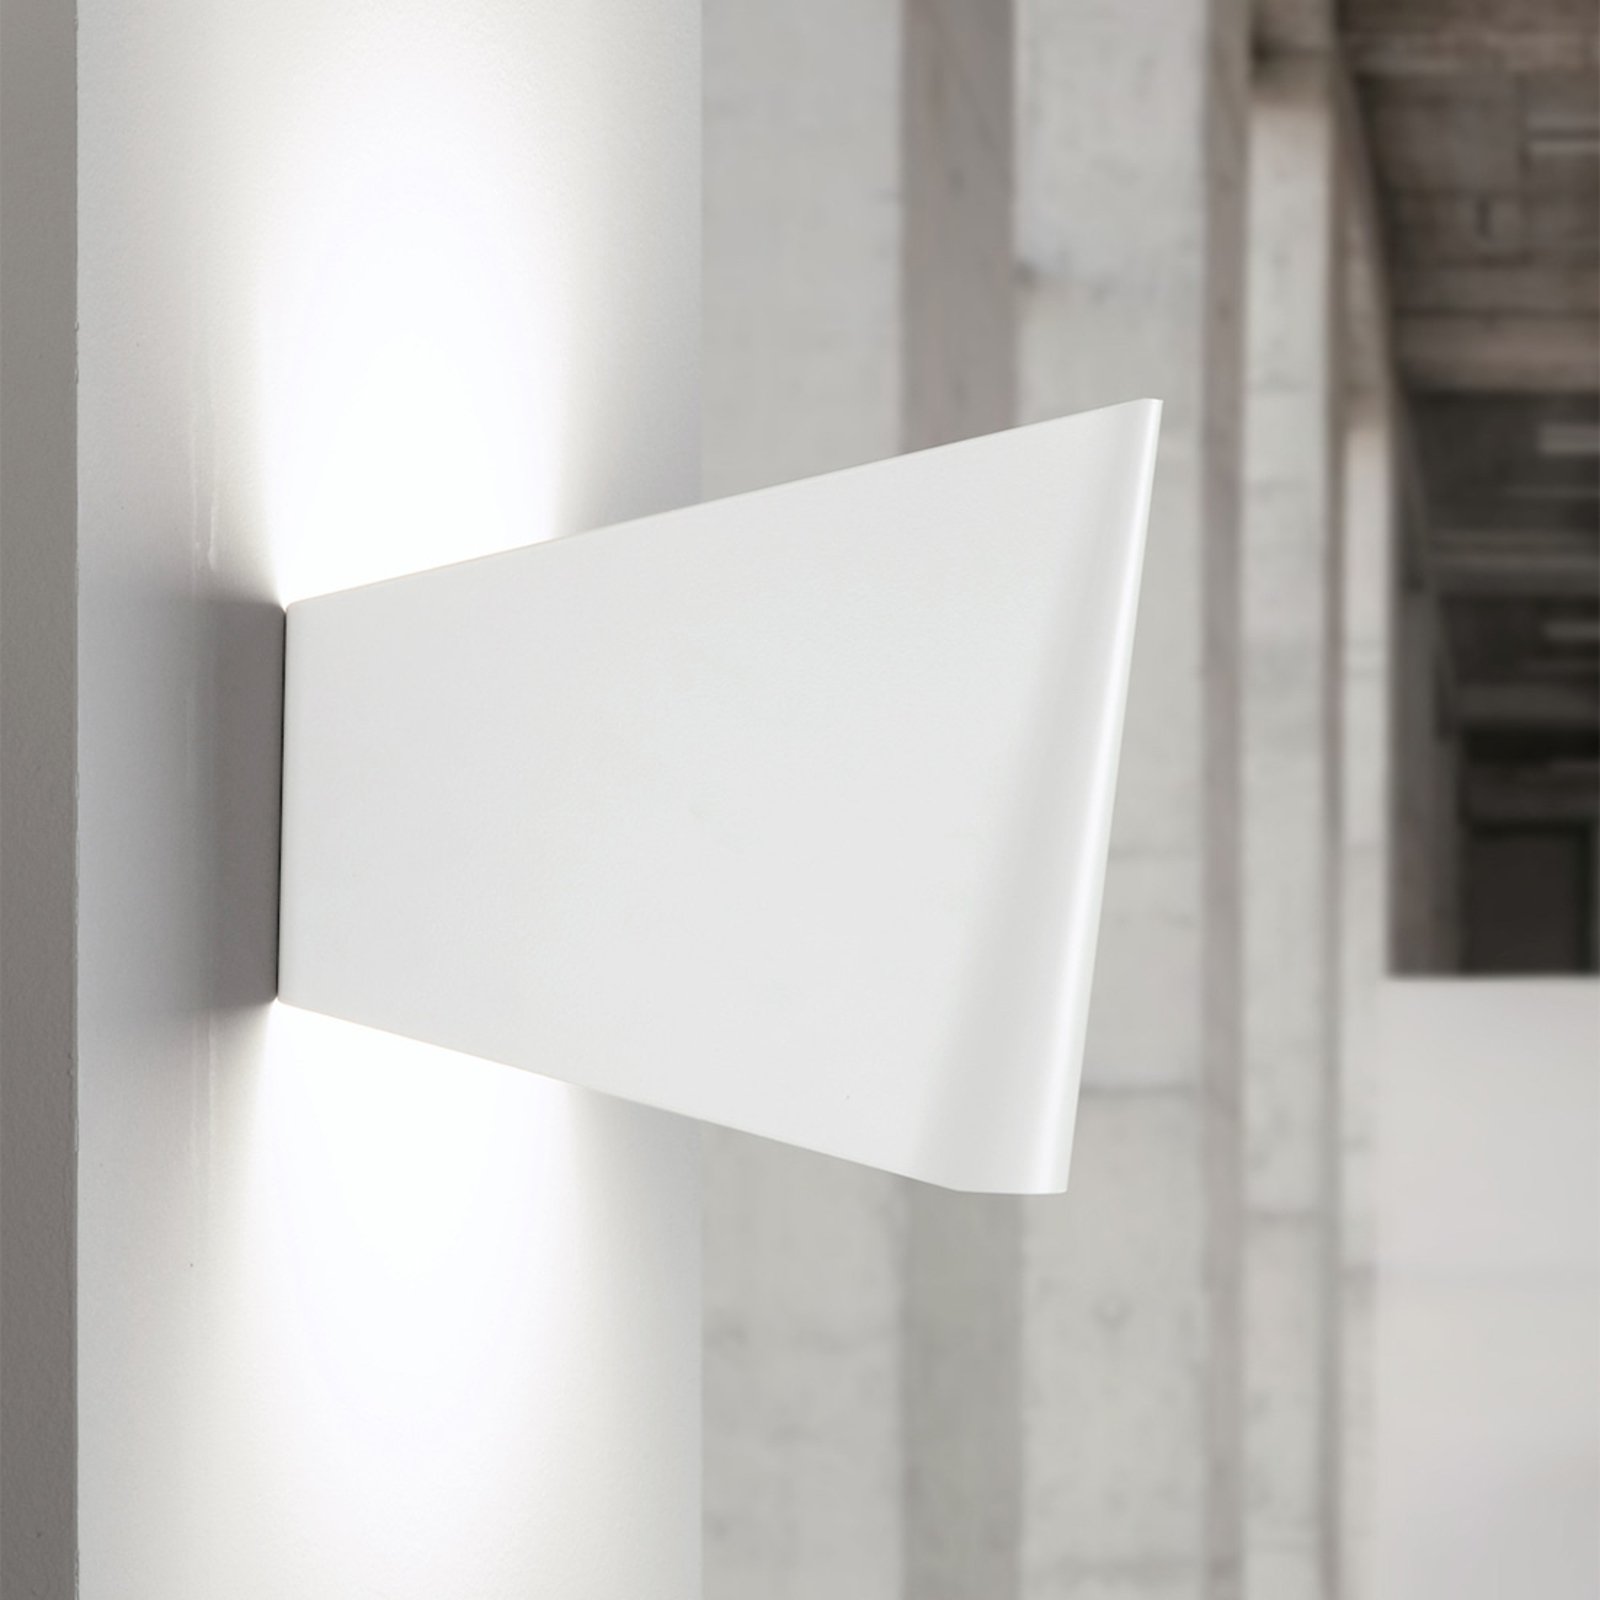 Casablanca Soso wall light, up and down